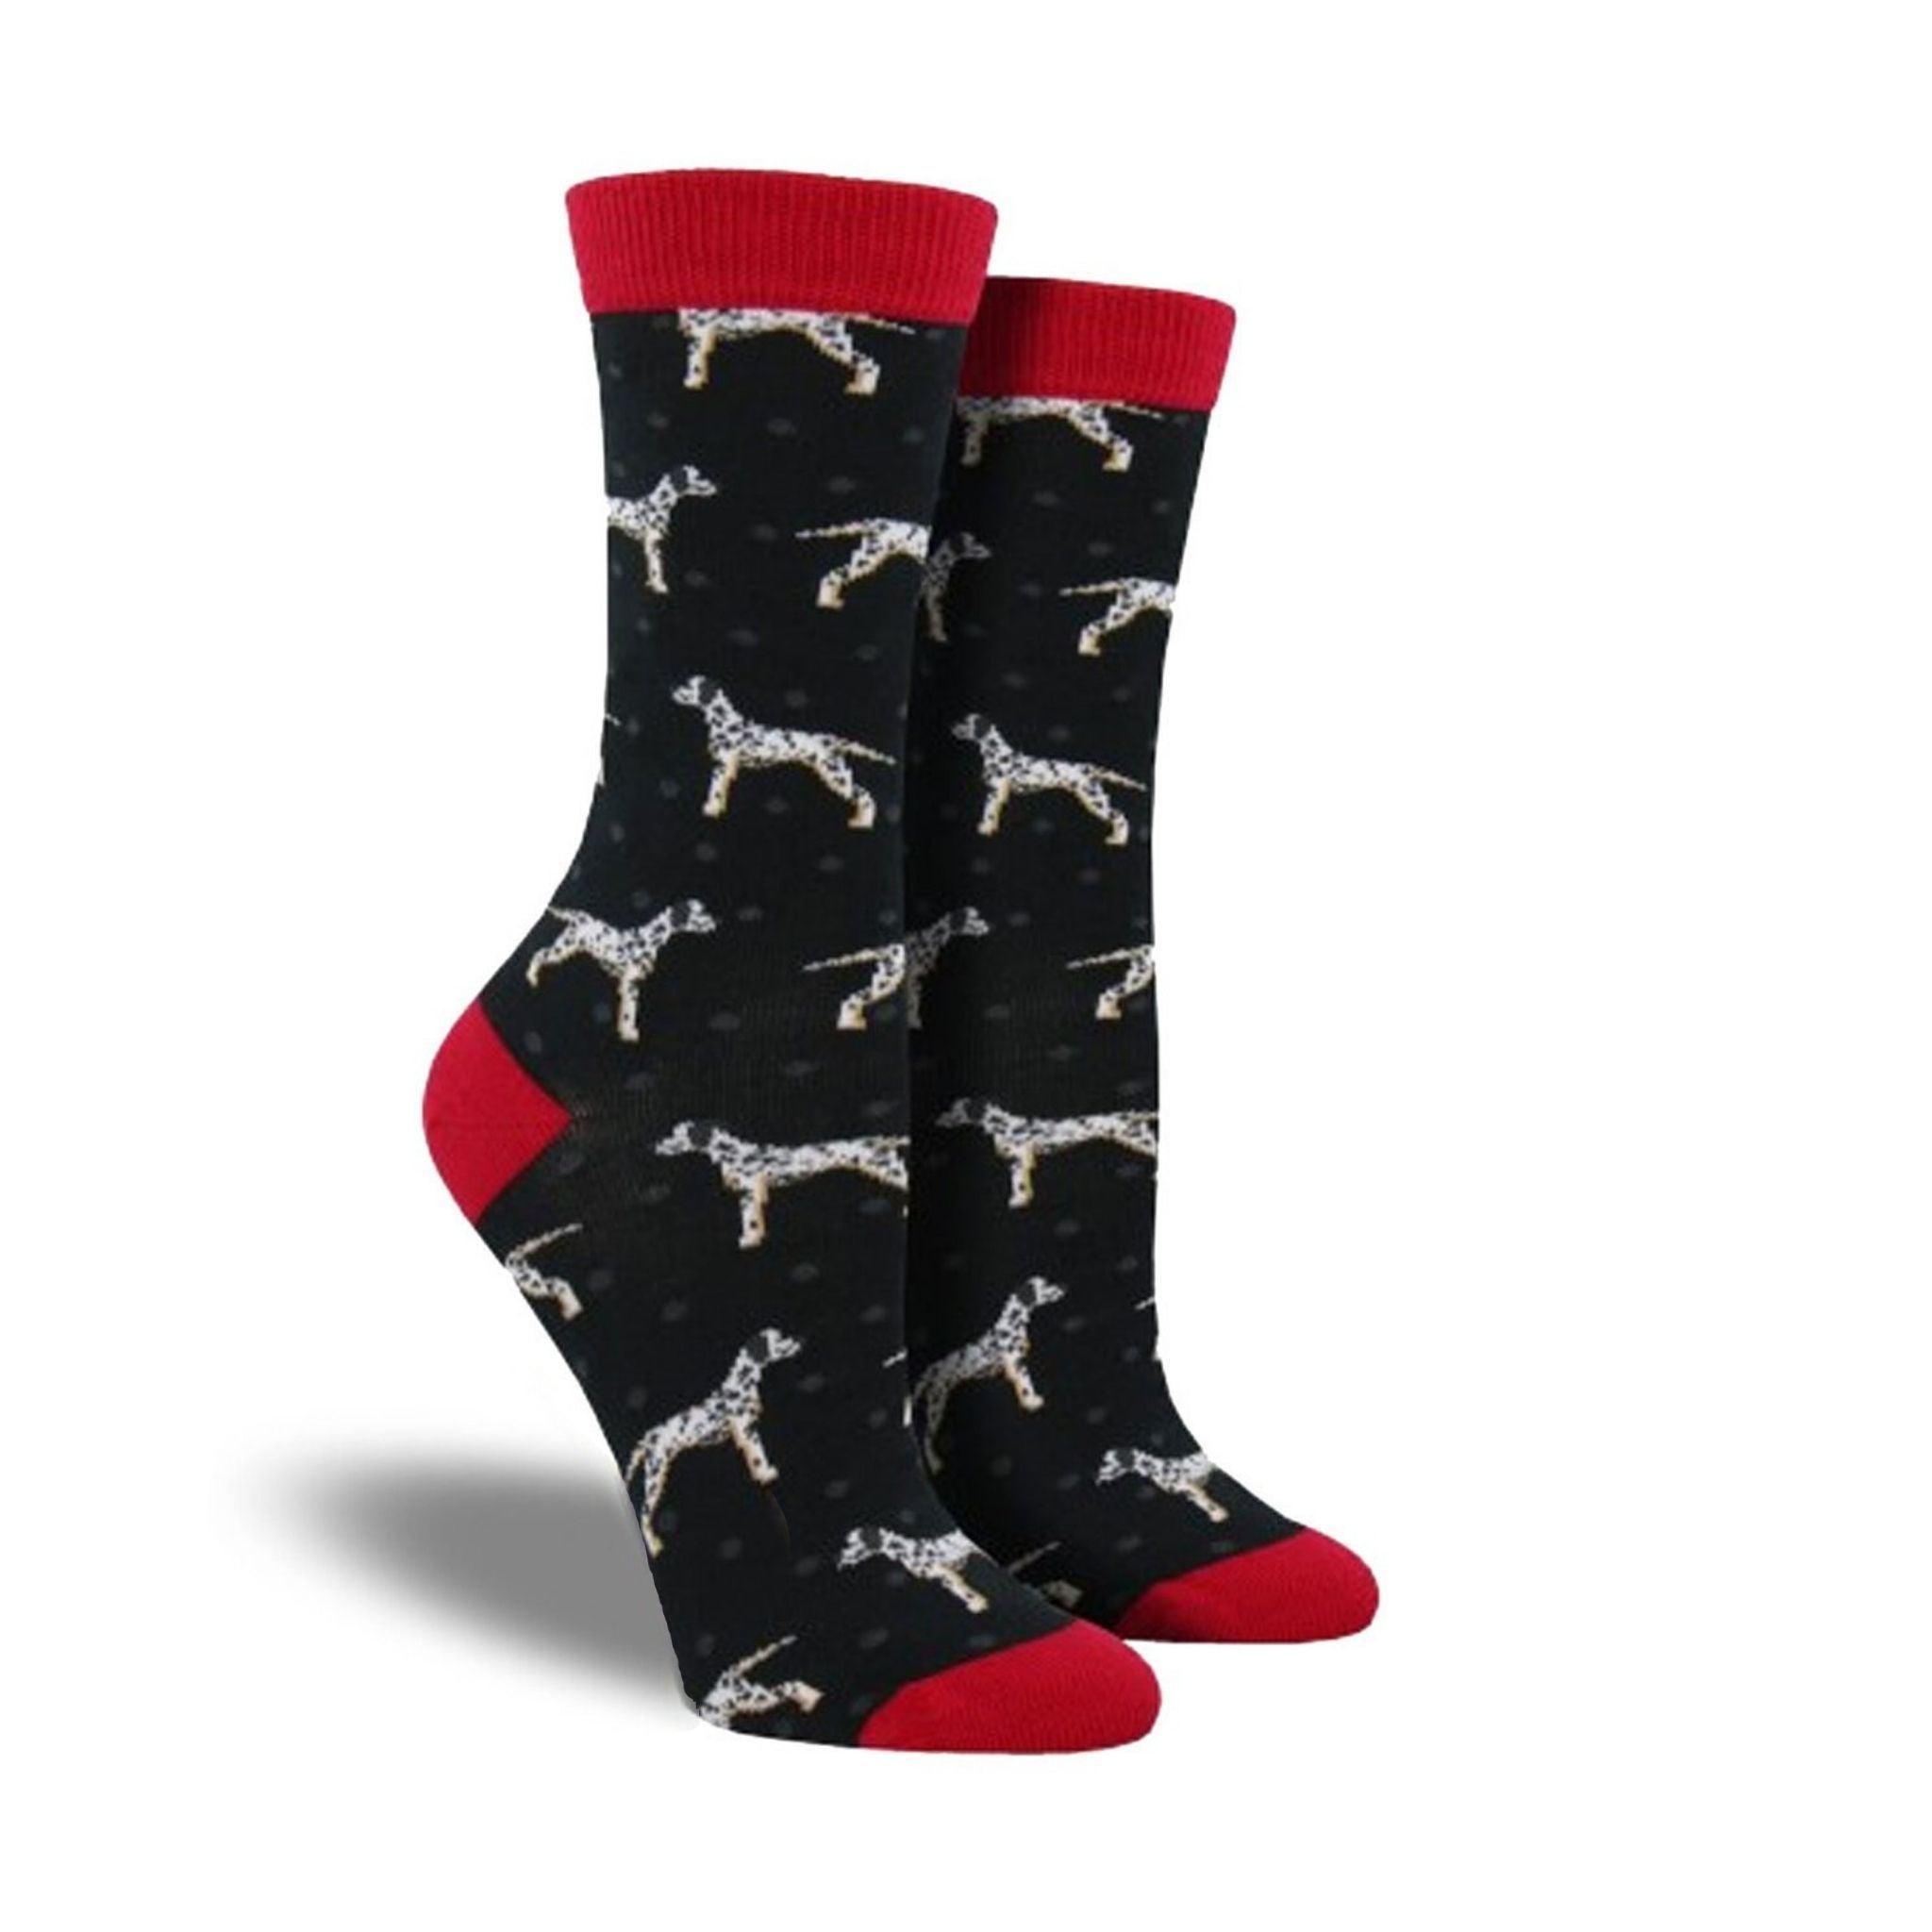 A pair of women&#39;s crew socks featuring dalmations.